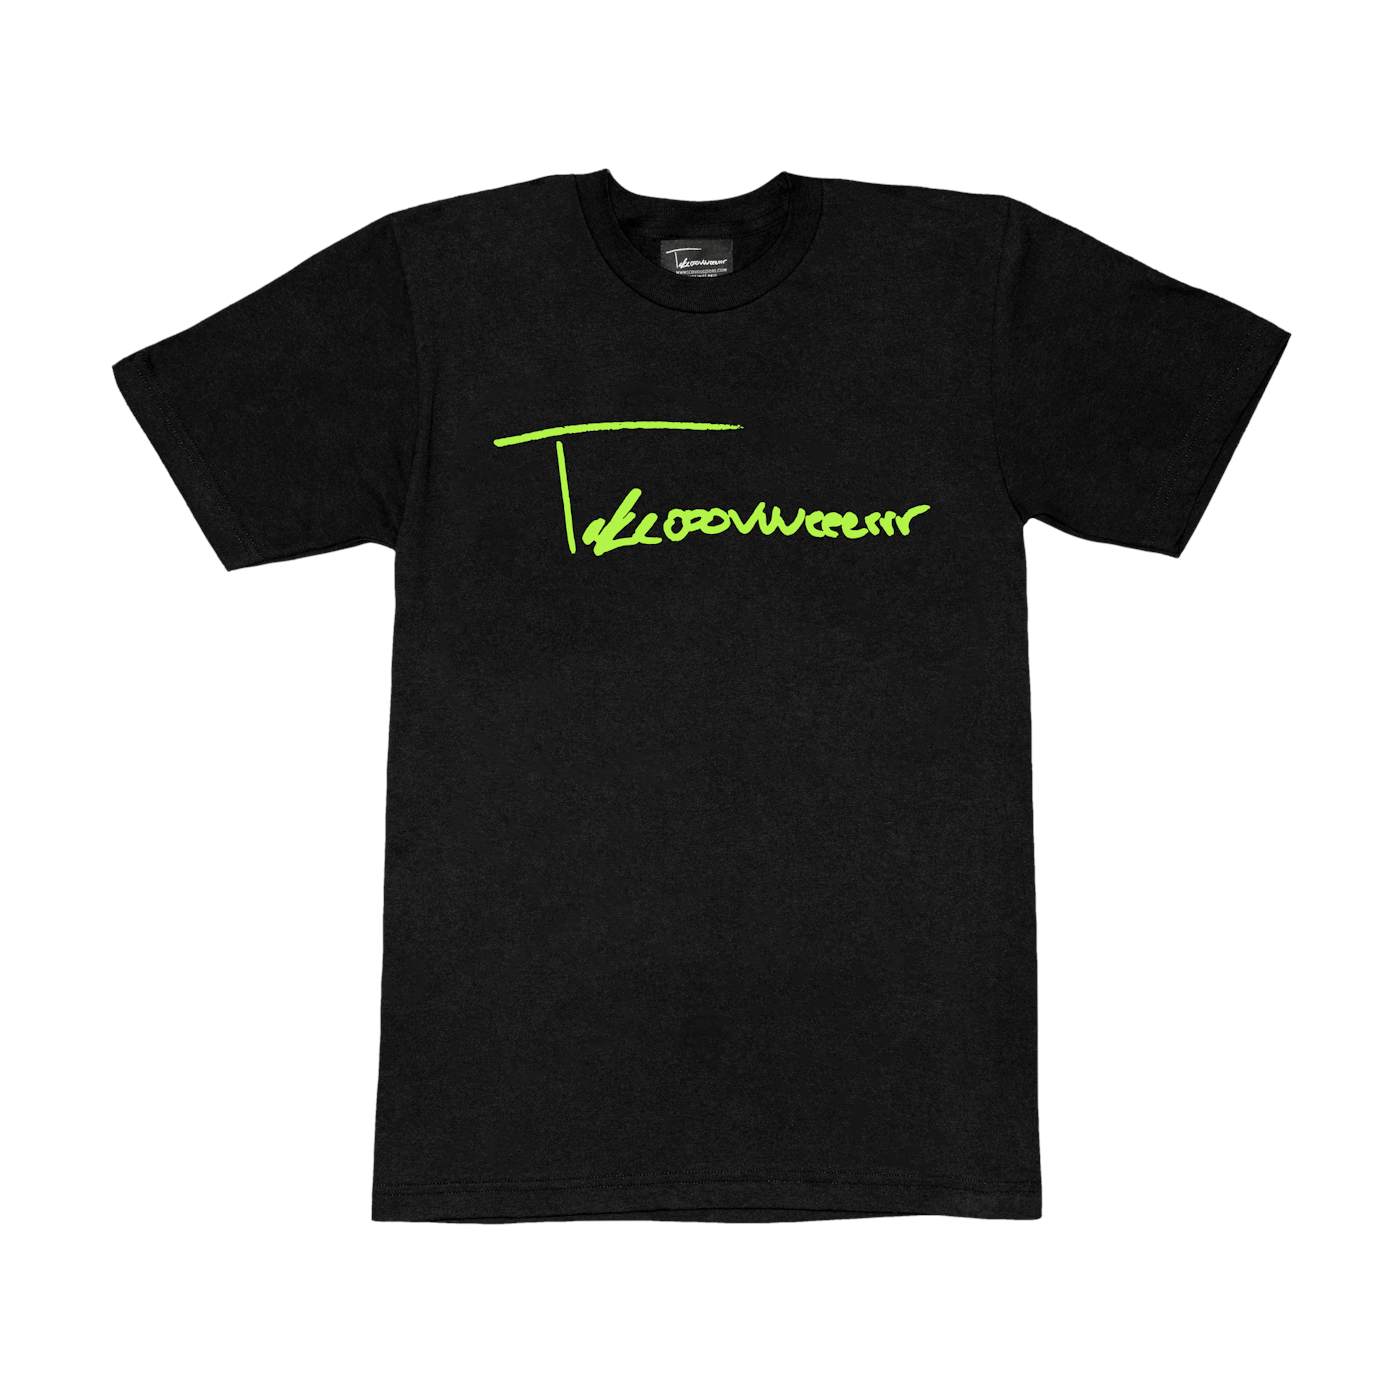 Taylor J Takeover Signature Tee (Black/Neon)